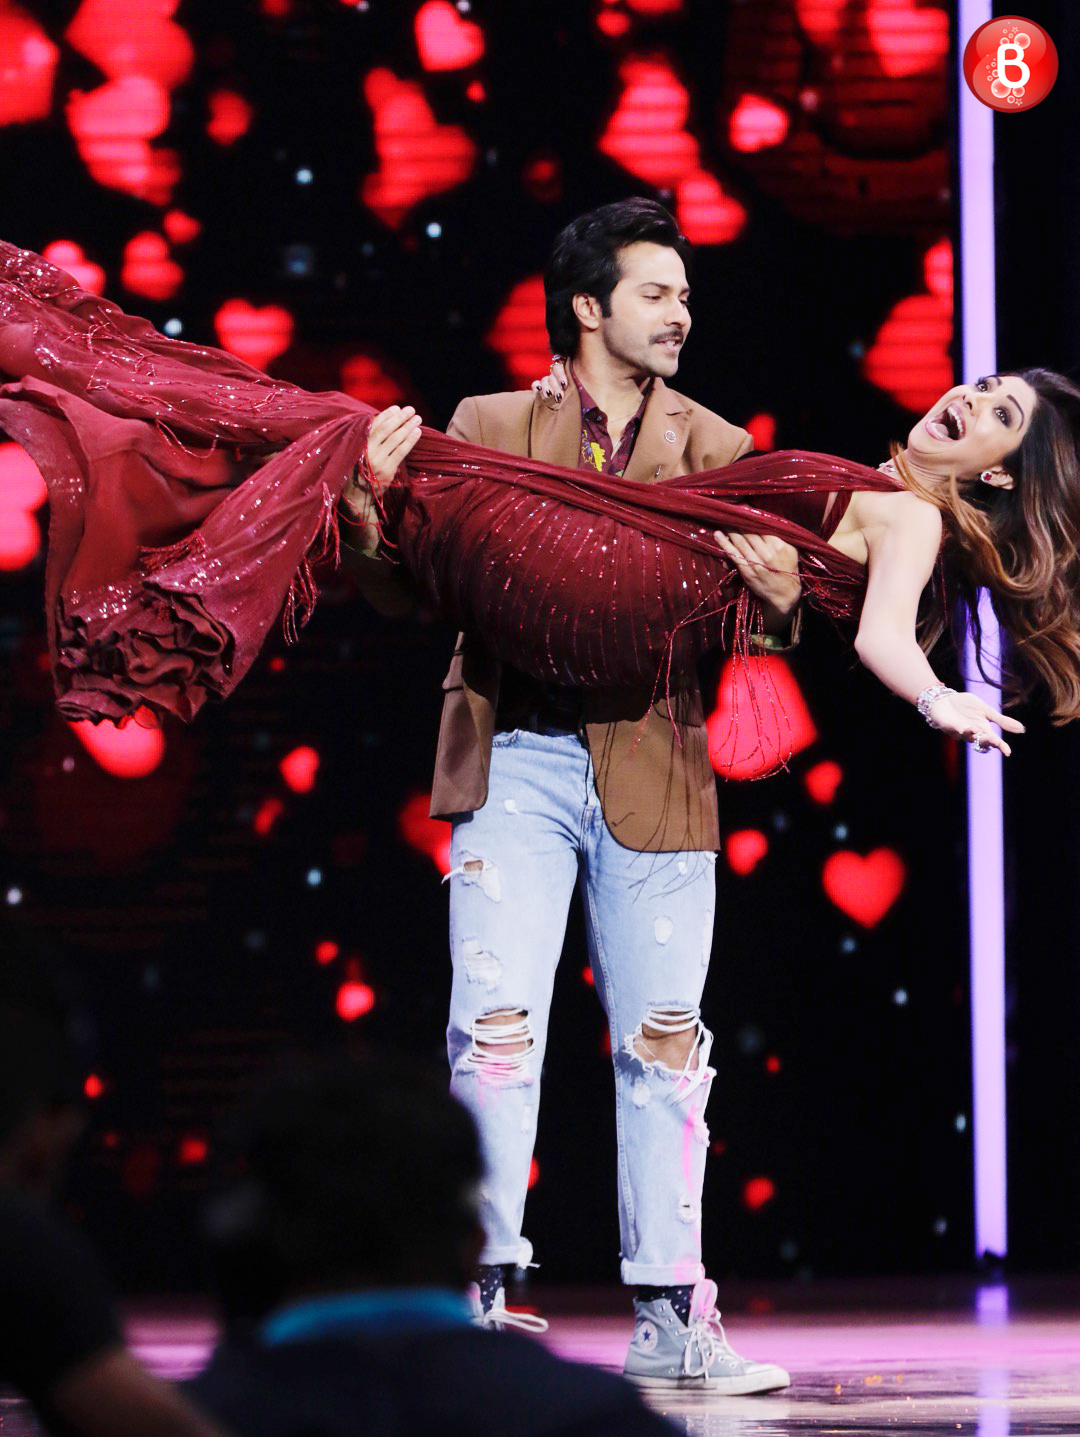 Varun Dhawan and Shilpa Shetty, Super Dancer pictures